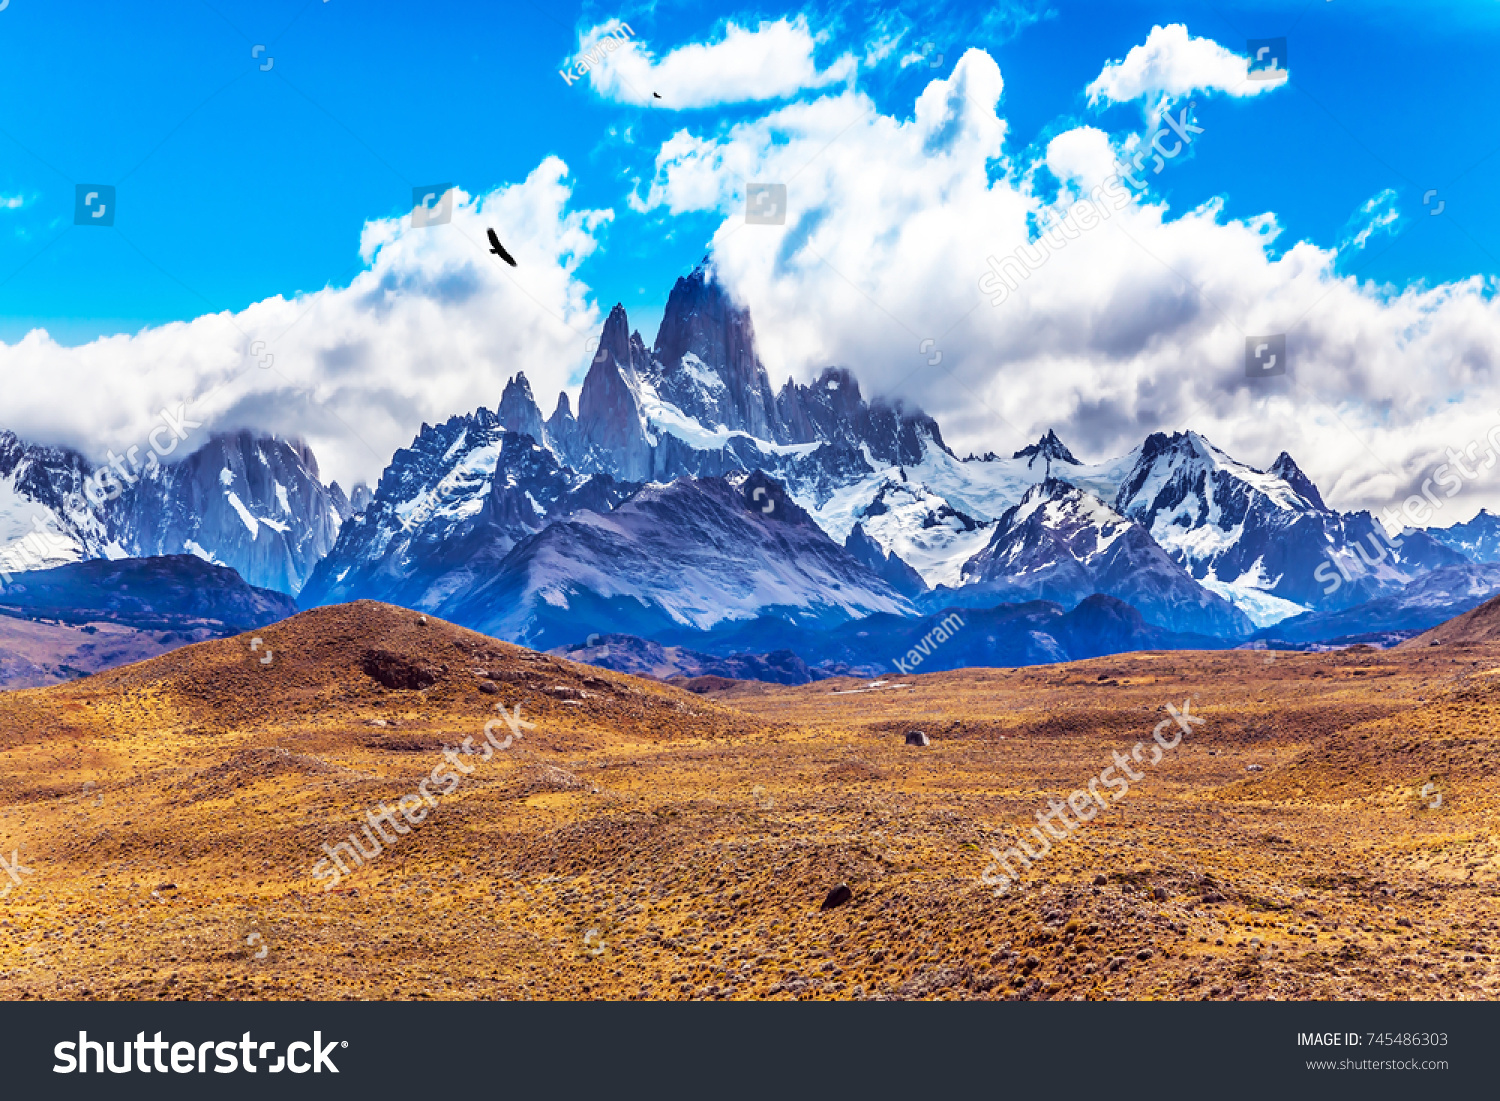 Desert and mountains. The famous ridge Mount Fitz Roy and the Patagonian prairie. Argentine Patagonia. The concept of active and extreme tourism #745486303